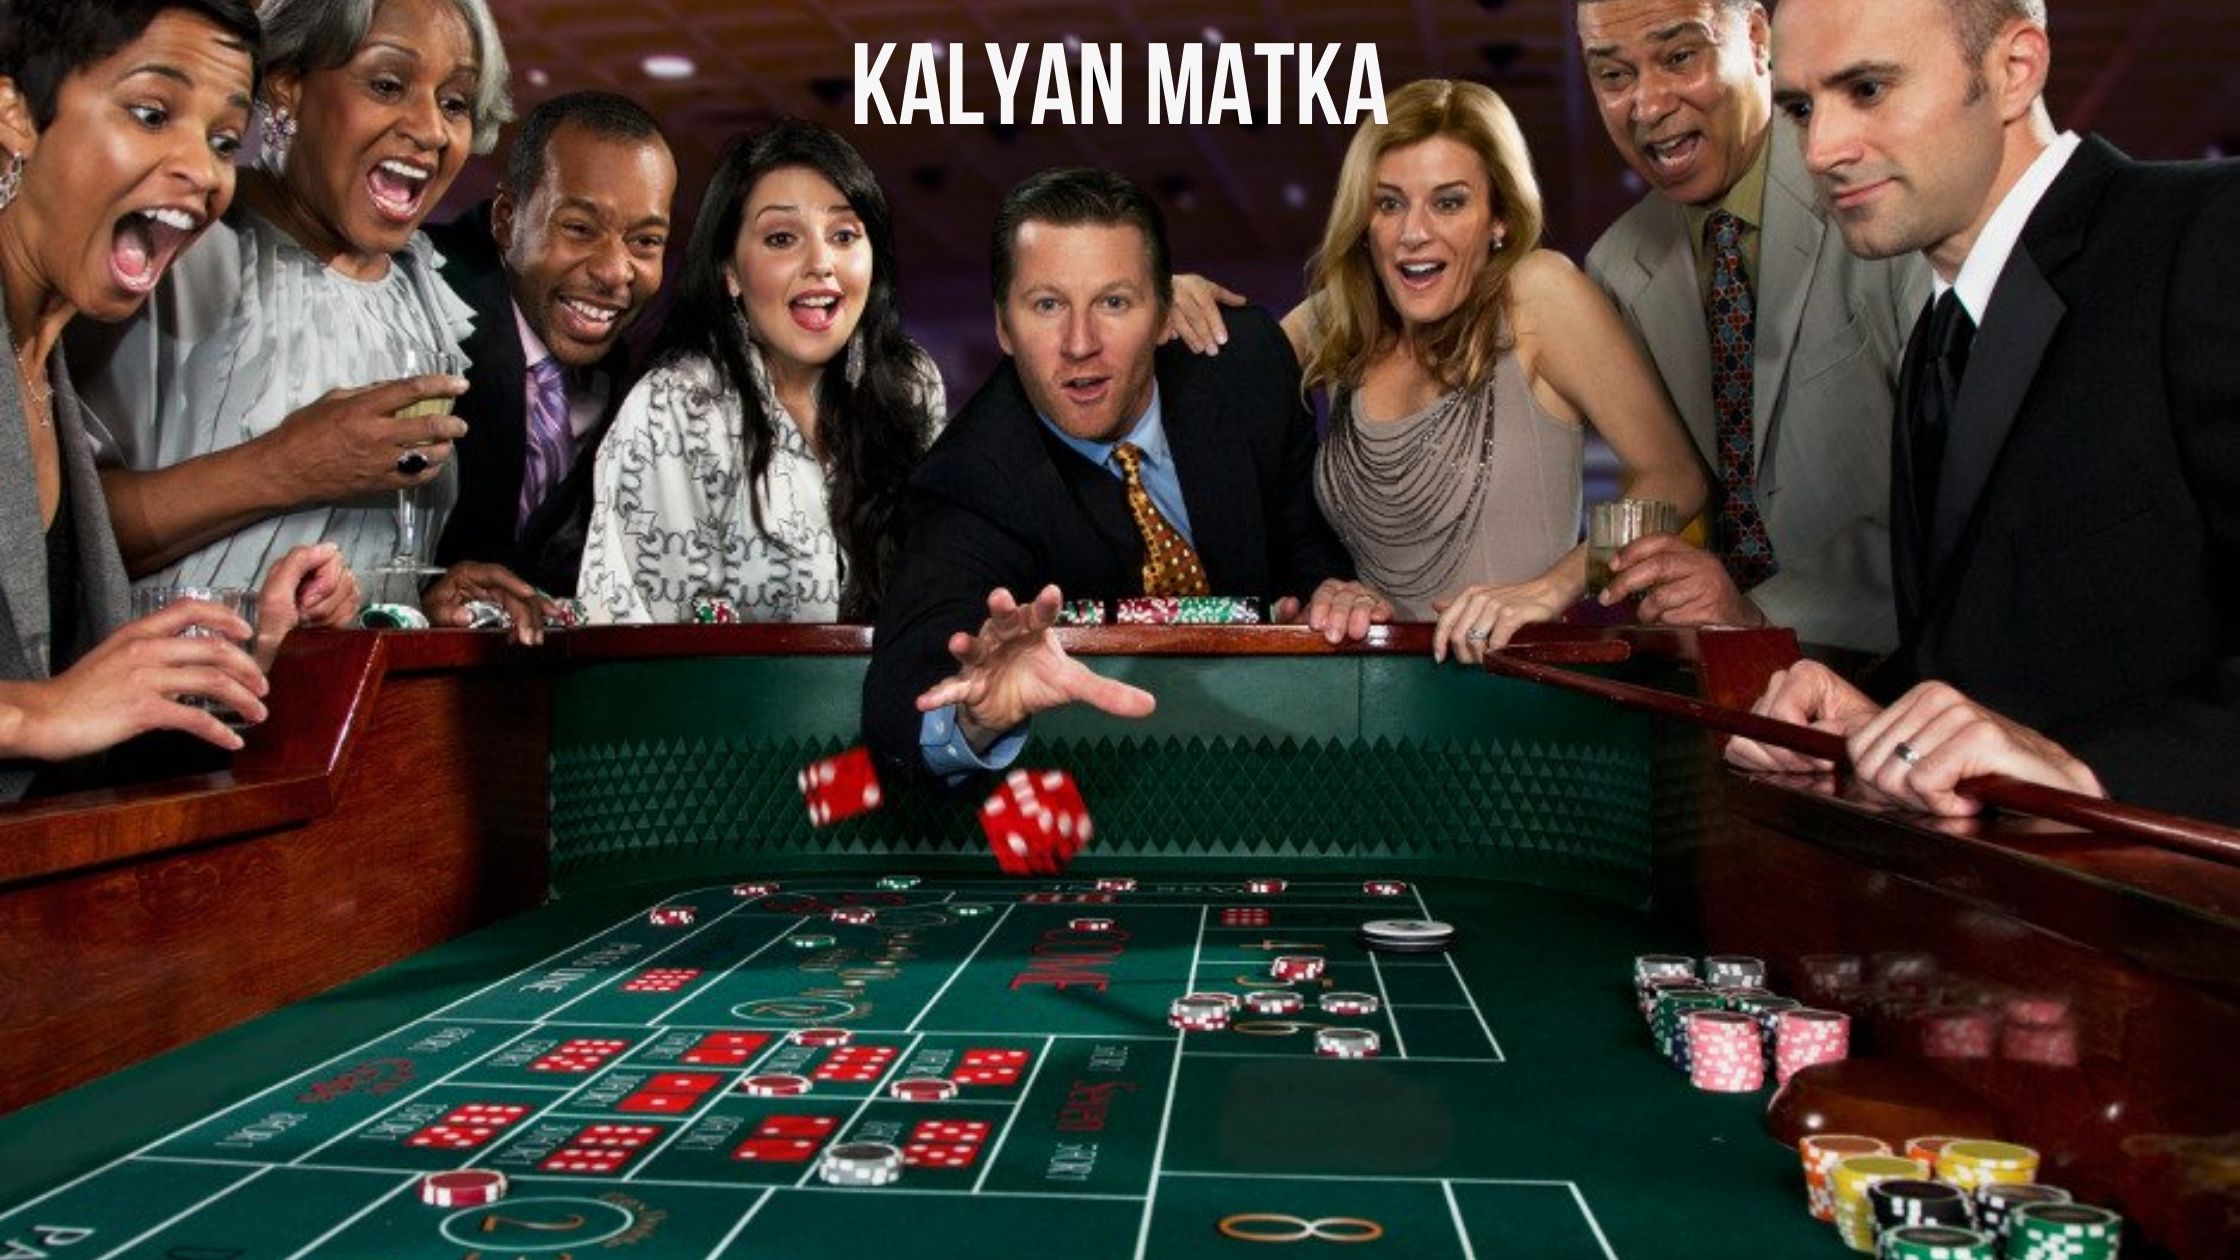 How To Win At Kalyan Matka: Proven Strategies For Success?